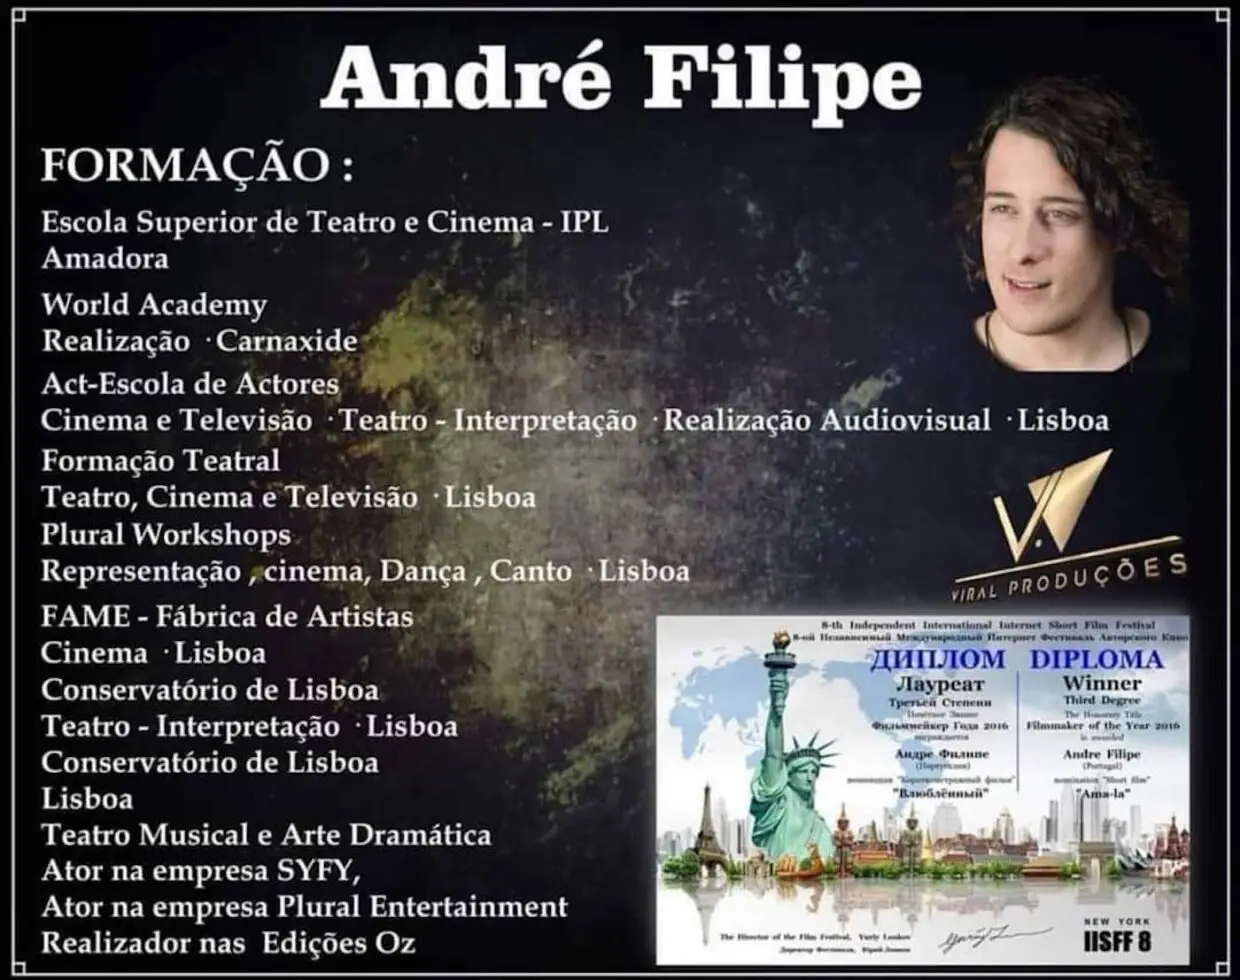 Andre Filipe Formacao Big Brother